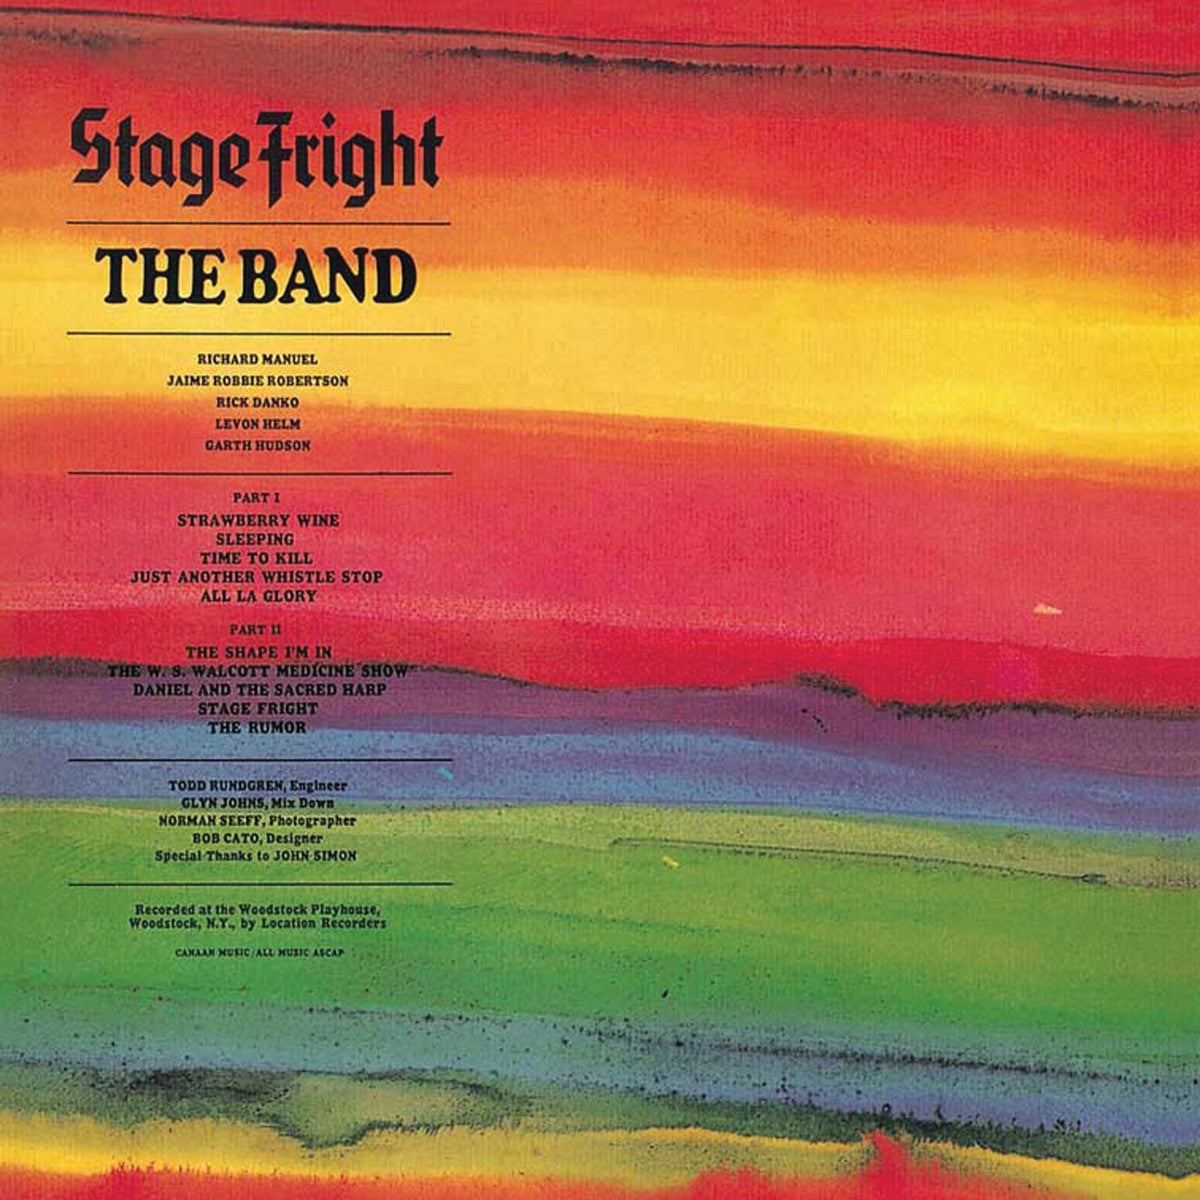 Band, The: Stage Fright (Vinyl LP)